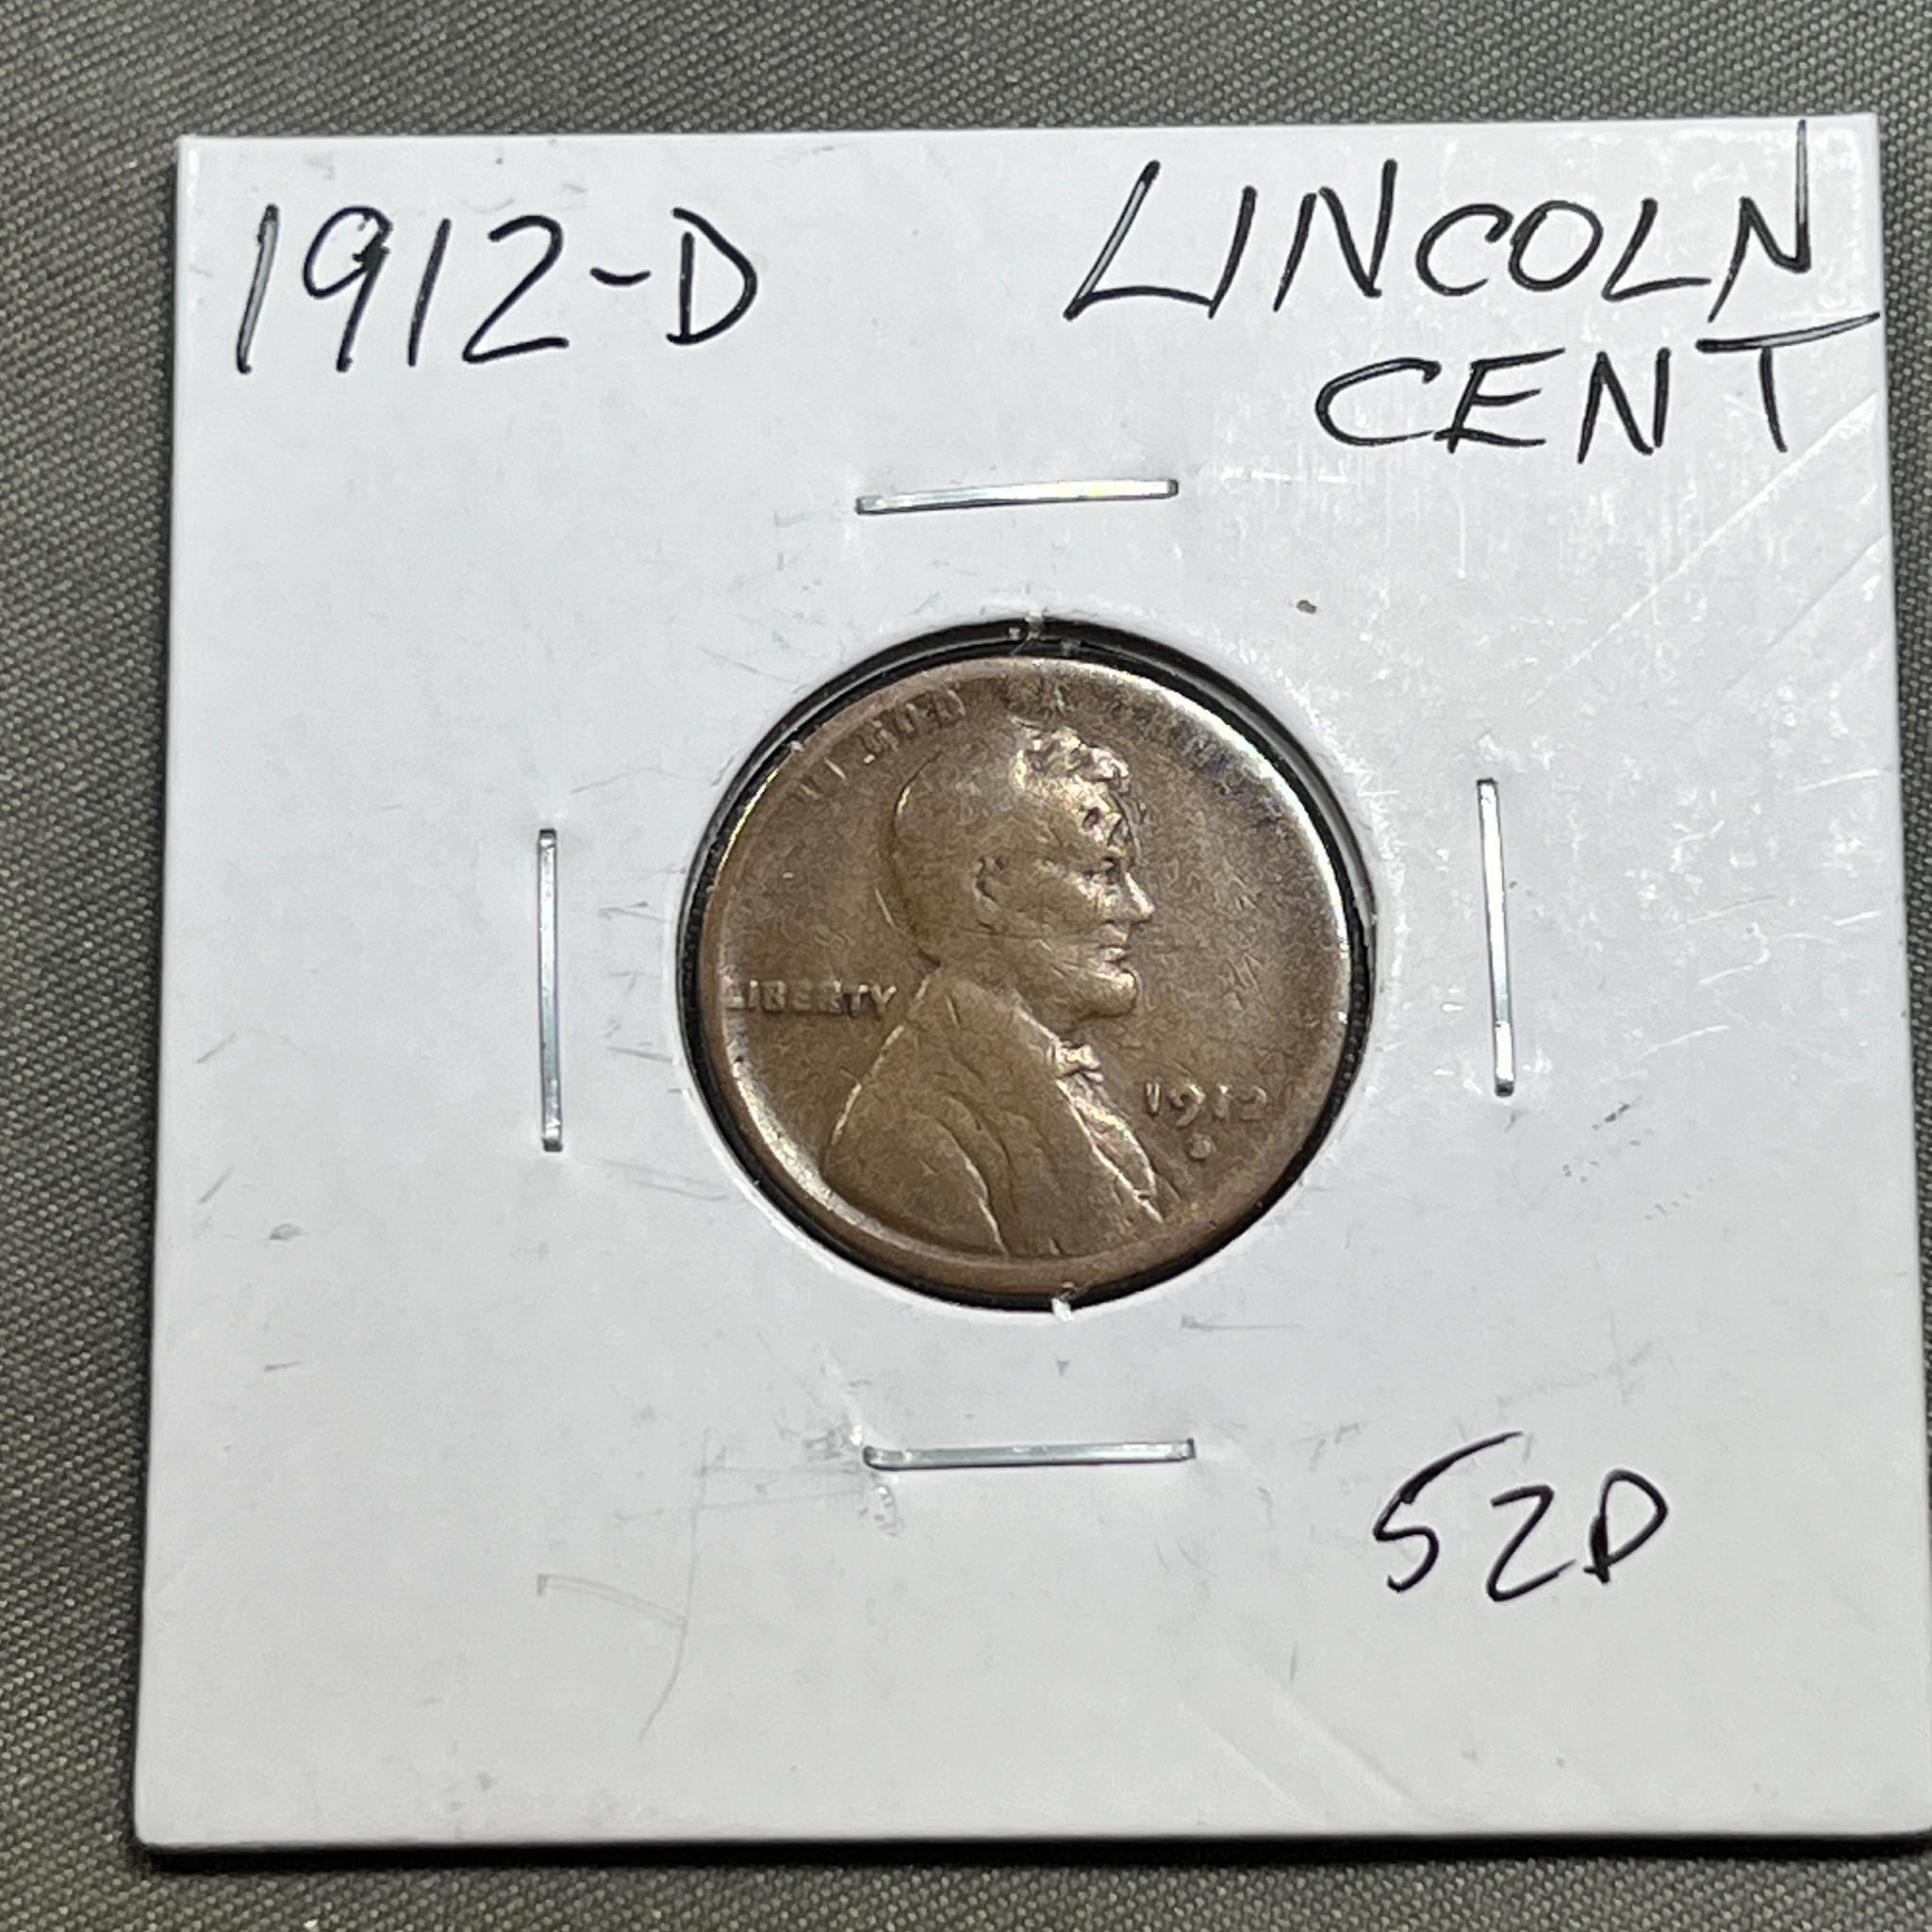 1912-D Lincoln Wheat Cent